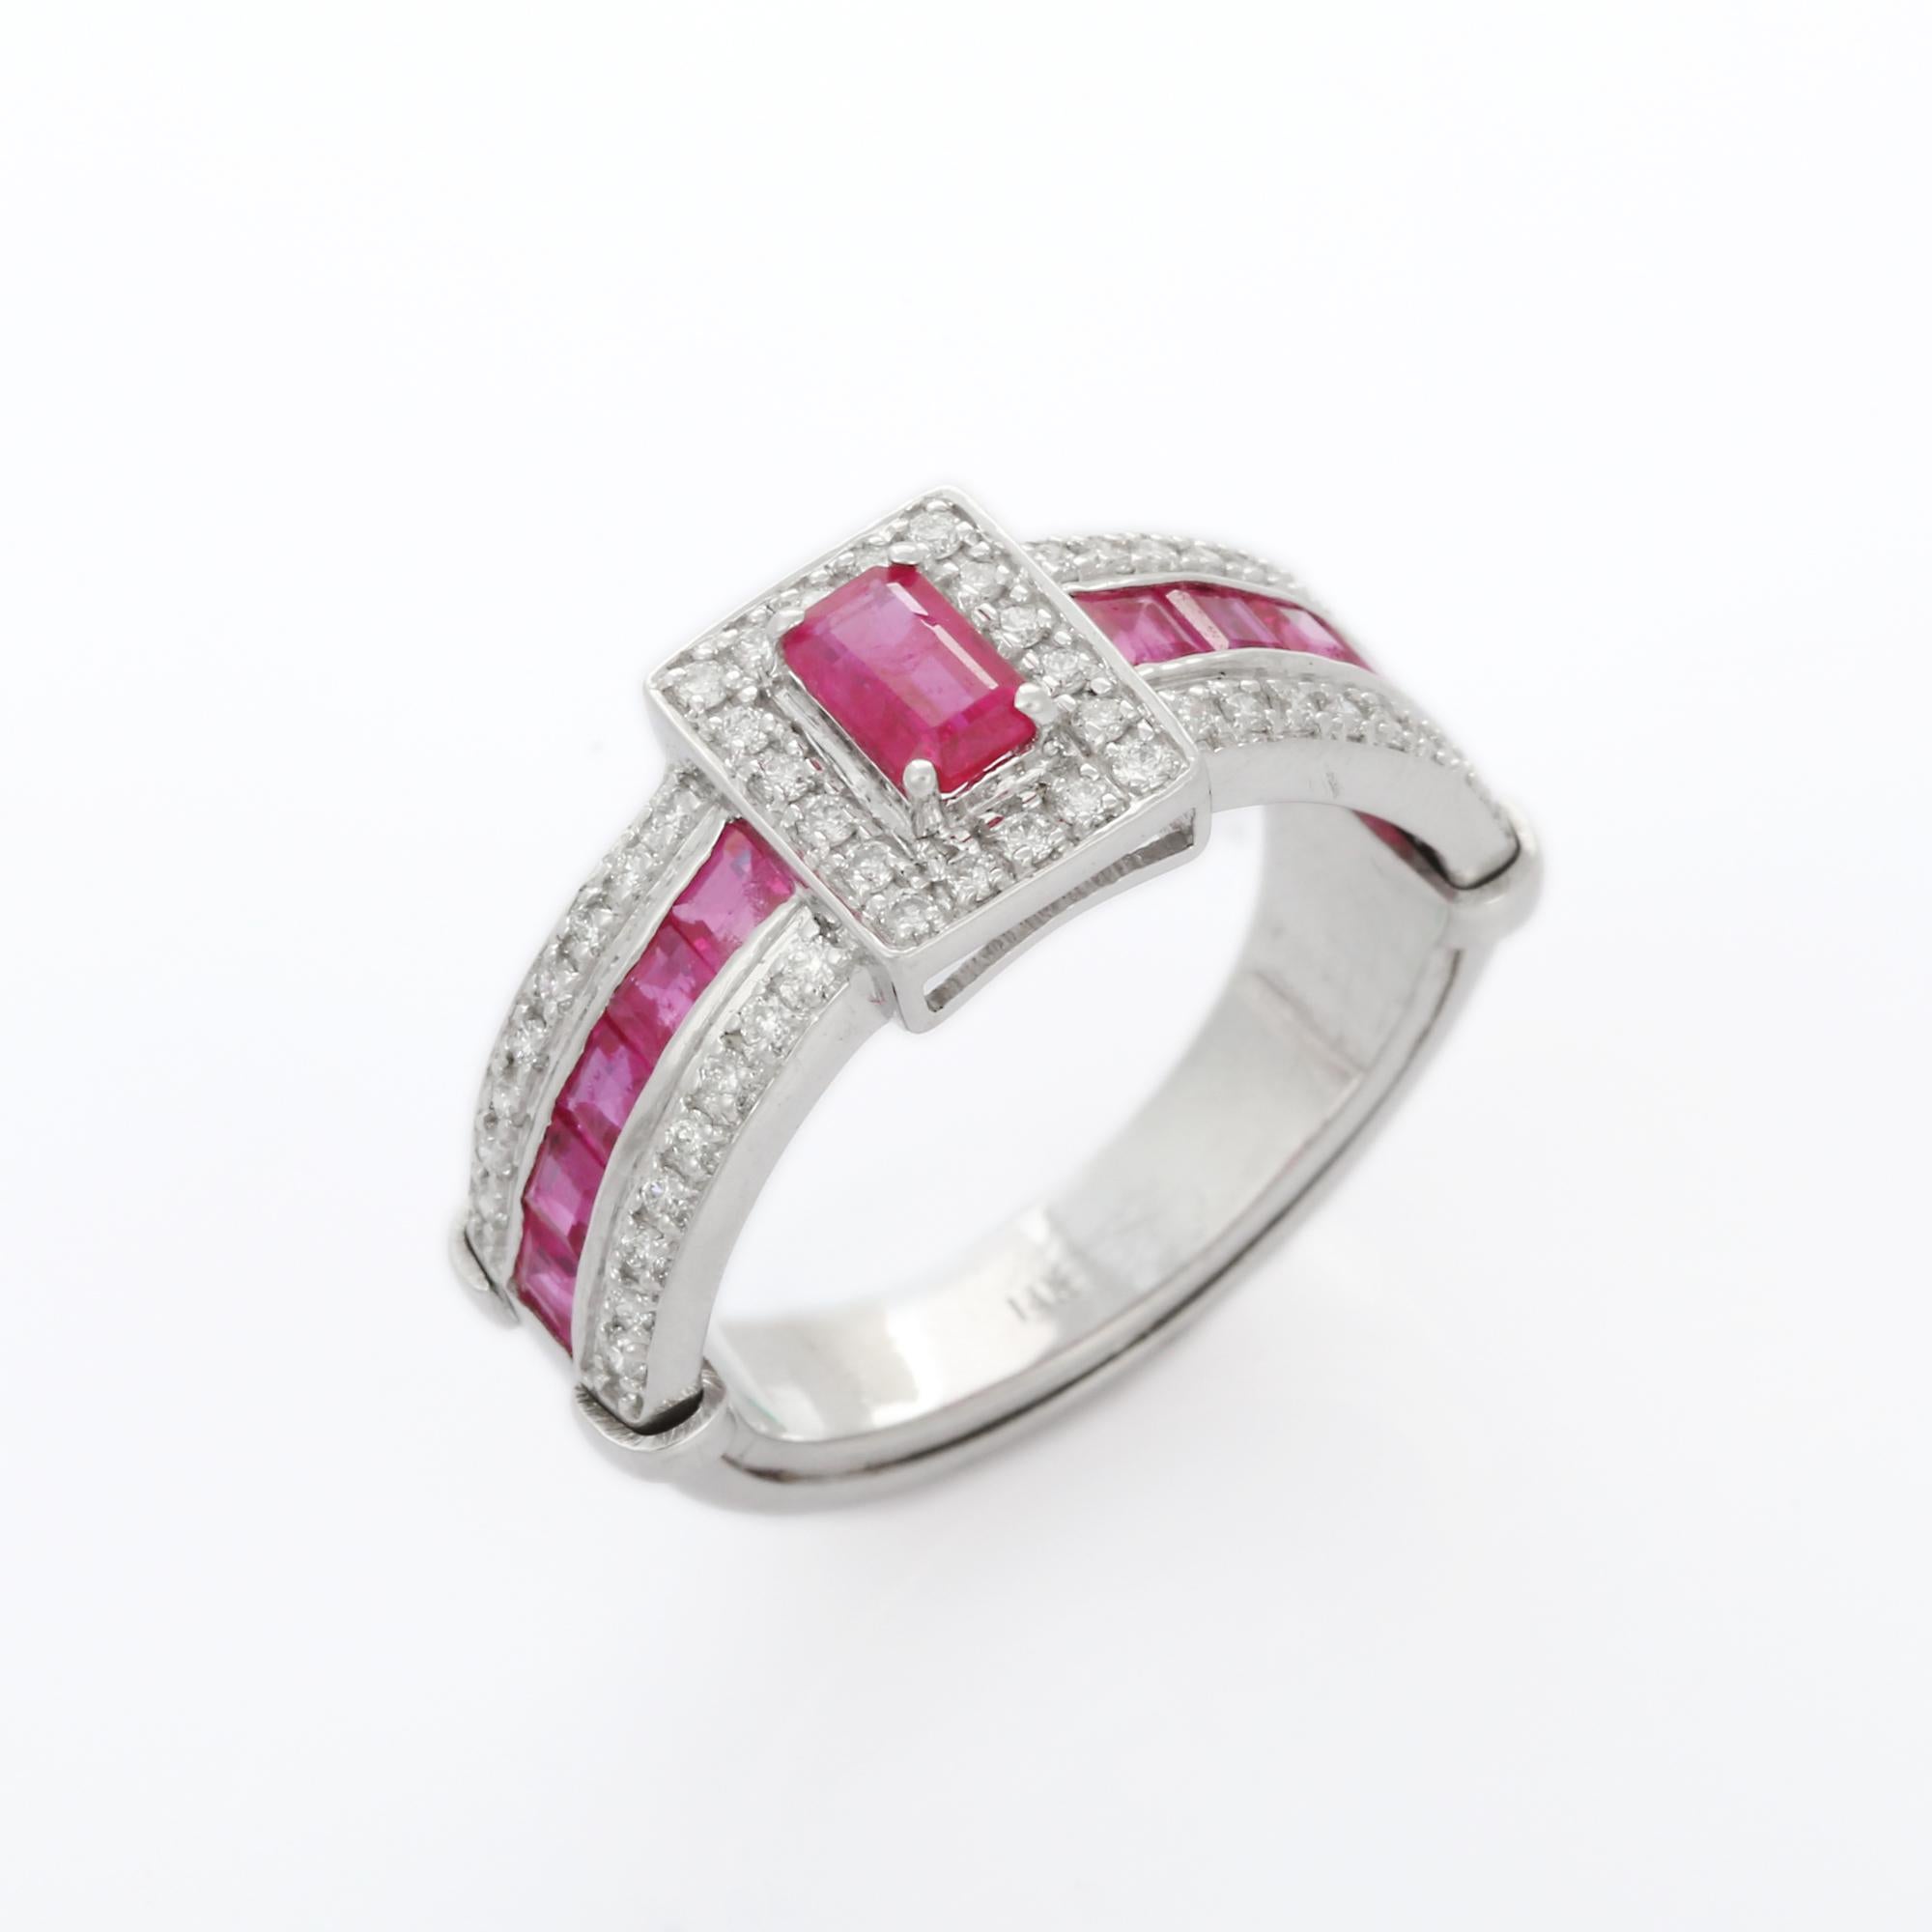 For Sale:  Prong Set Ruby Cluster Ring in 14K White Gold with Diamonds    12